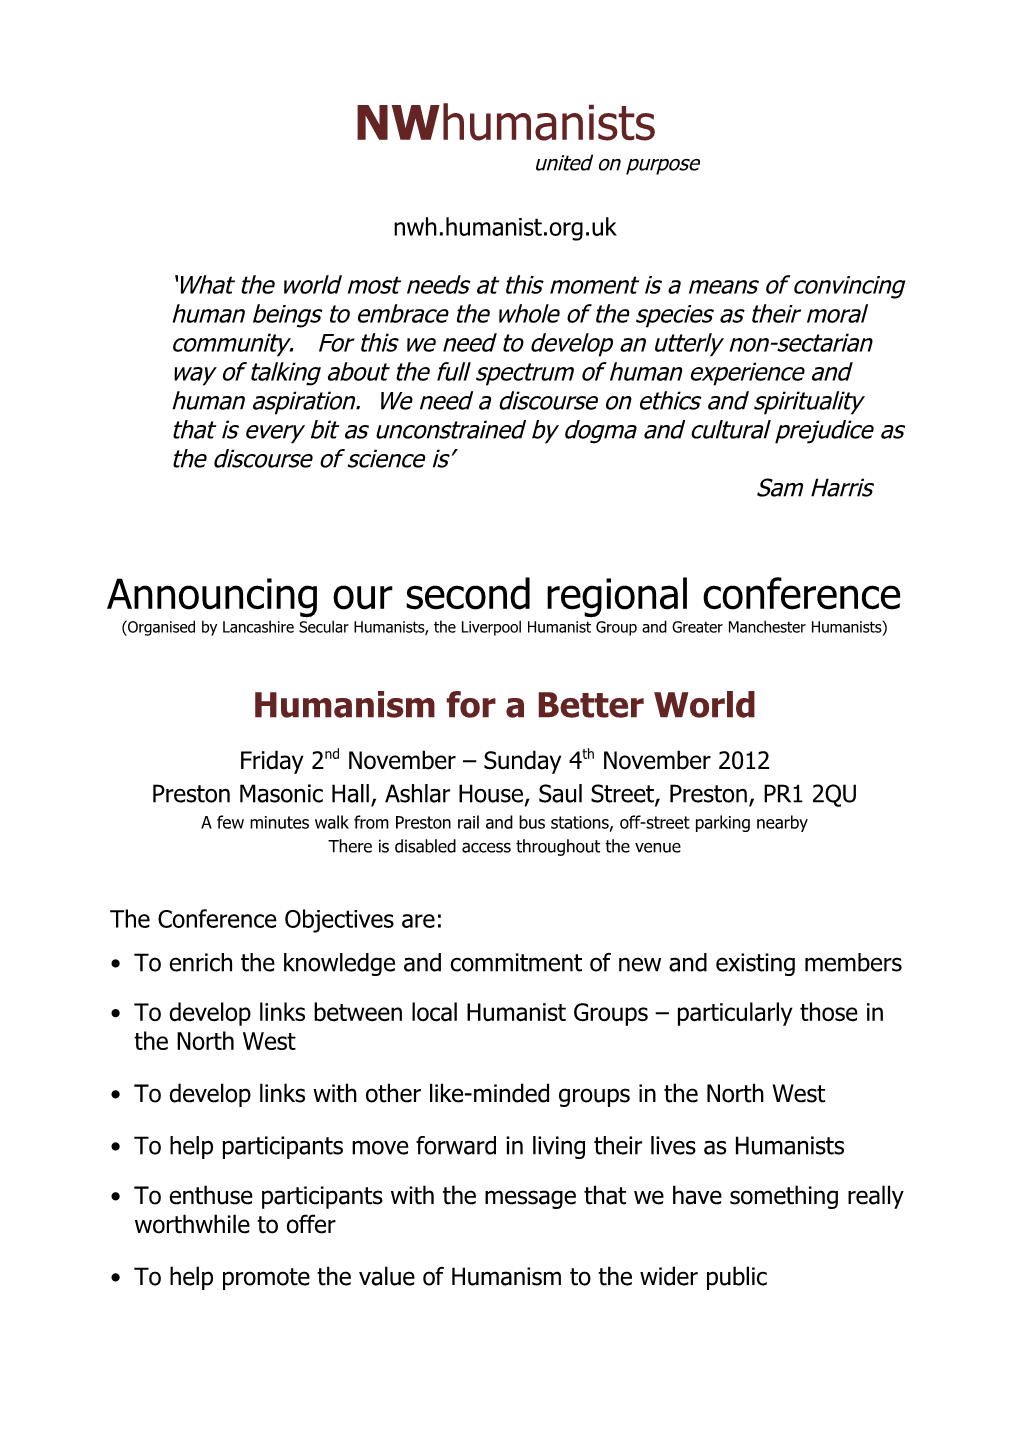 Announcing Our Second Regional Conference